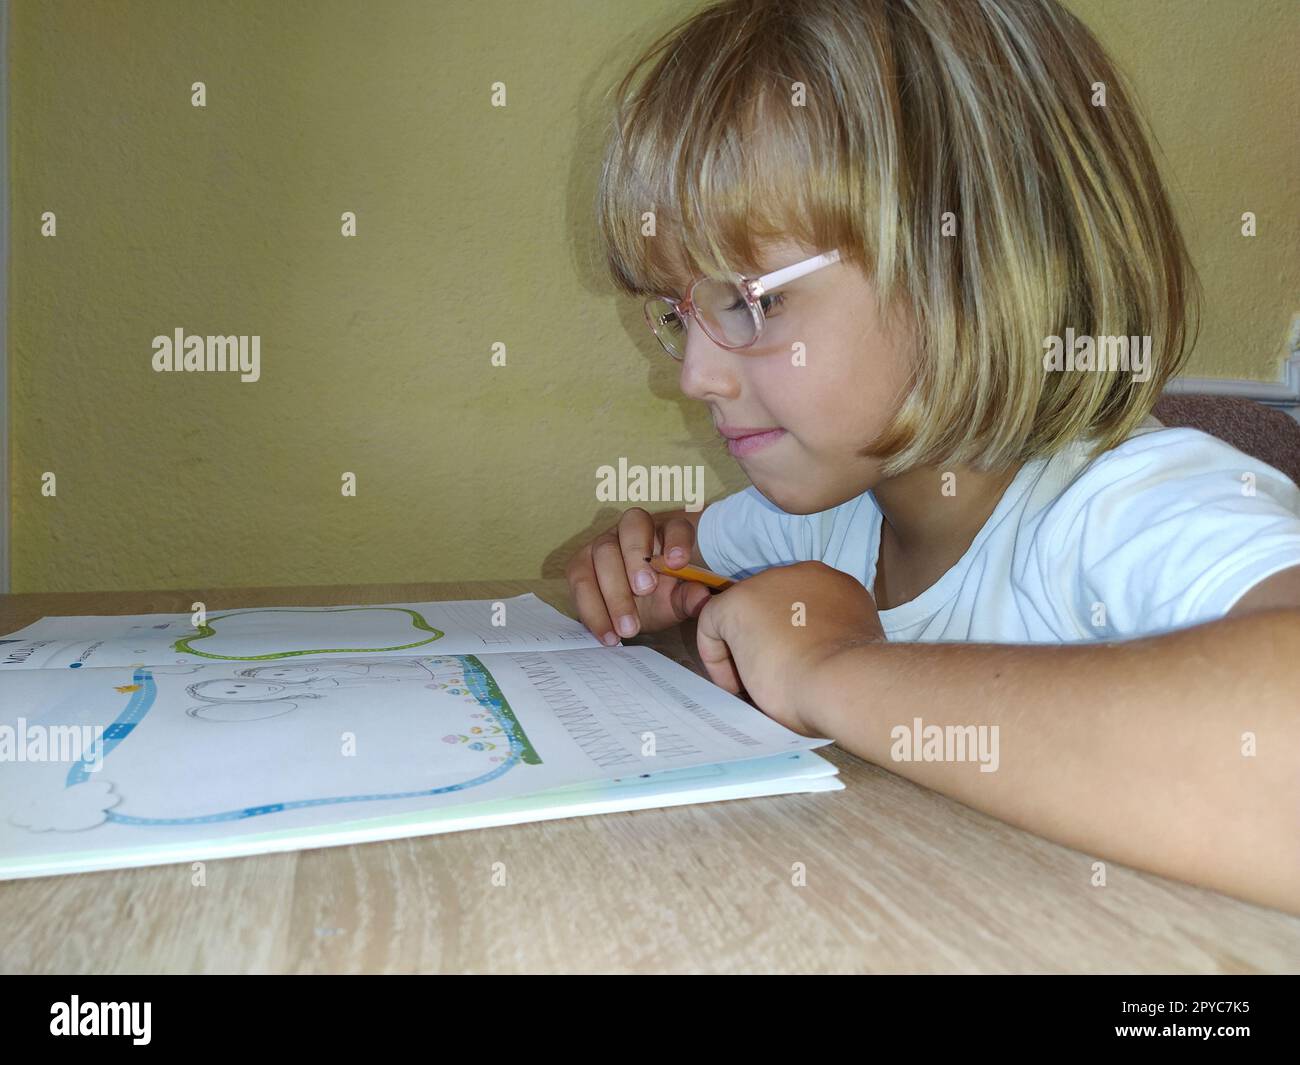 A 6-7 year old girl is reading a book or textbook and smiling. The child has blond hair, dark skin and glasses on his face. The child sits at the desk. yellow wall in the background Stock Photo